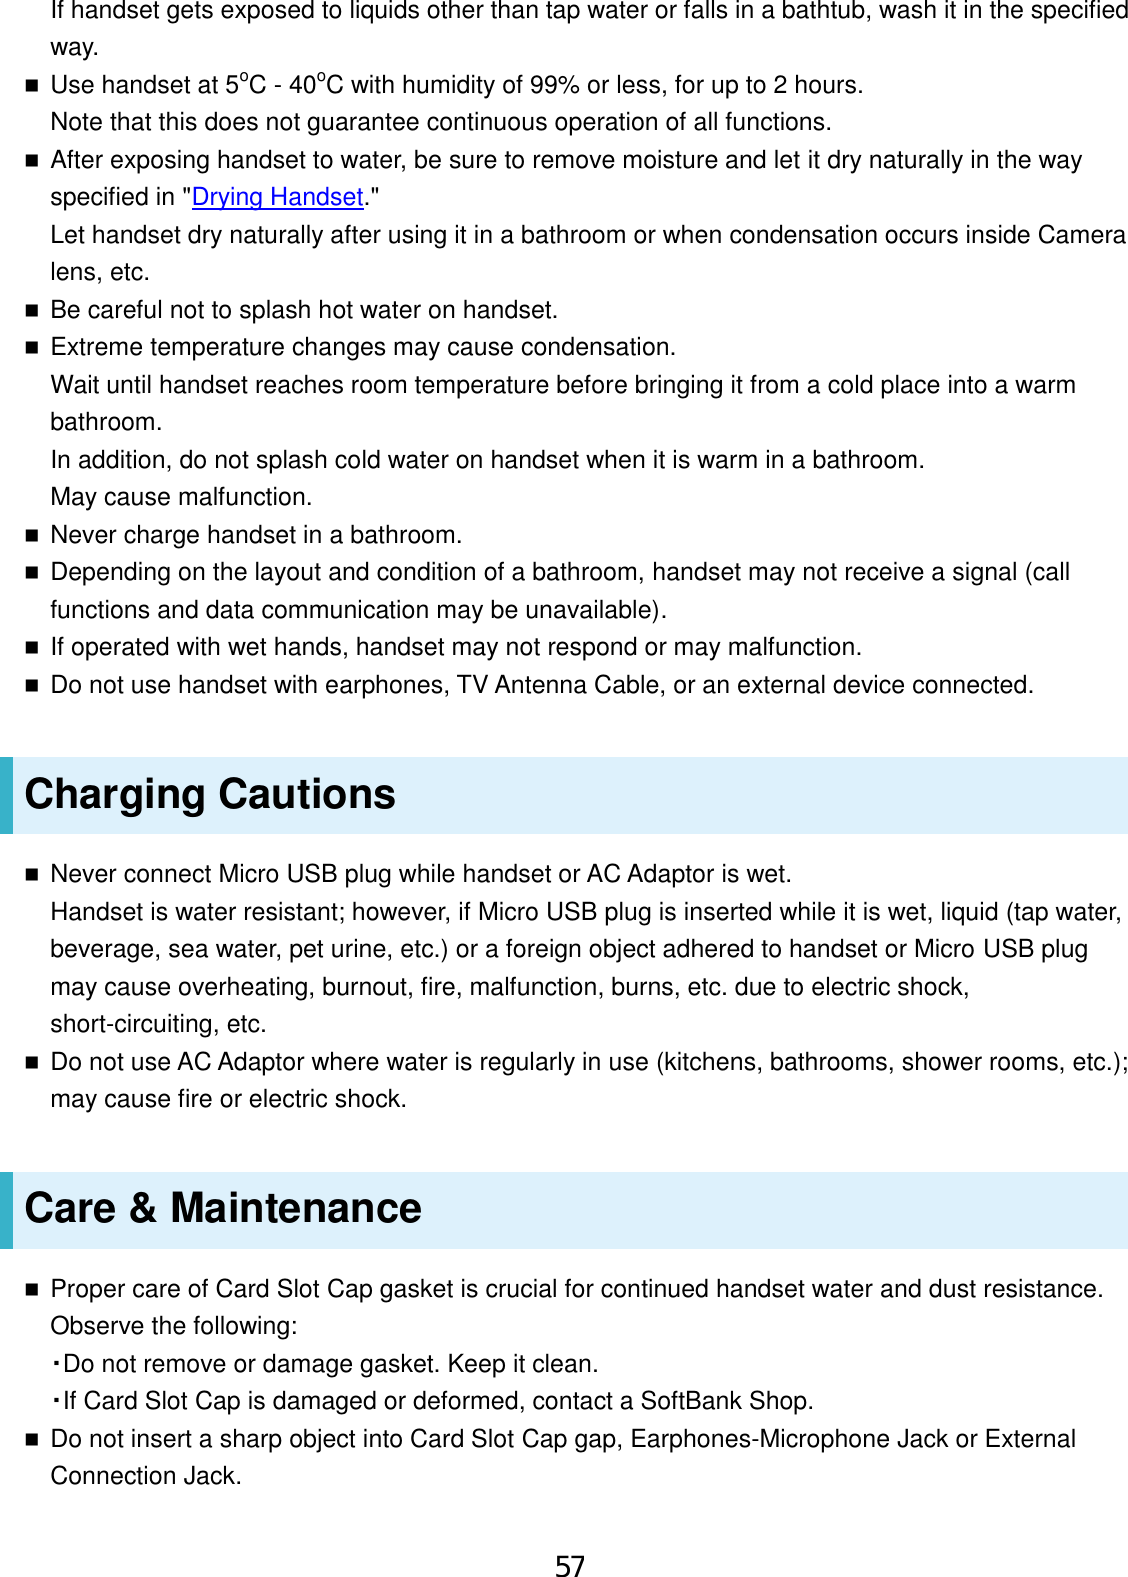 If handset gets exposed to liquids other than tap water or falls in a bathtub, wash it in the specified way. Use handset at 5oC - 40oC with humidity of 99% or less, for up to 2 hours.Note that this does not guarantee continuous operation of all functions.After exposing handset to water, be sure to remove moisture and let it dry naturally in the wayspecified in &quot;Drying Handset.&quot;Let handset dry naturally after using it in a bathroom or when condensation occurs inside Cameralens, etc.Be careful not to splash hot water on handset.Extreme temperature changes may cause condensation.Wait until handset reaches room temperature before bringing it from a cold place into a warmbathroom.In addition, do not splash cold water on handset when it is warm in a bathroom.May cause malfunction.Never charge handset in a bathroom.Depending on the layout and condition of a bathroom, handset may not receive a signal (callfunctions and data communication may be unavailable).If operated with wet hands, handset may not respond or may malfunction.Do not use handset with earphones, TV Antenna Cable, or an external device connected.Charging Cautions Never connect Micro USB plug while handset or AC Adaptor is wet.Handset is water resistant; however, if Micro USB plug is inserted while it is wet, liquid (tap water,beverage, sea water, pet urine, etc.) or a foreign object adhered to handset or Micro USB plugmay cause overheating, burnout, fire, malfunction, burns, etc. due to electric shock,short-circuiting, etc.Do not use AC Adaptor where water is regularly in use (kitchens, bathrooms, shower rooms, etc.);may cause fire or electric shock.Care &amp; Maintenance Proper care of Card Slot Cap gasket is crucial for continued handset water and dust resistance.Observe the following:・Do not remove or damage gasket. Keep it clean.・If Card Slot Cap is damaged or deformed, contact a SoftBank Shop.Do not insert a sharp object into Card Slot Cap gap, Earphones-Microphone Jack or ExternalConnection Jack.57